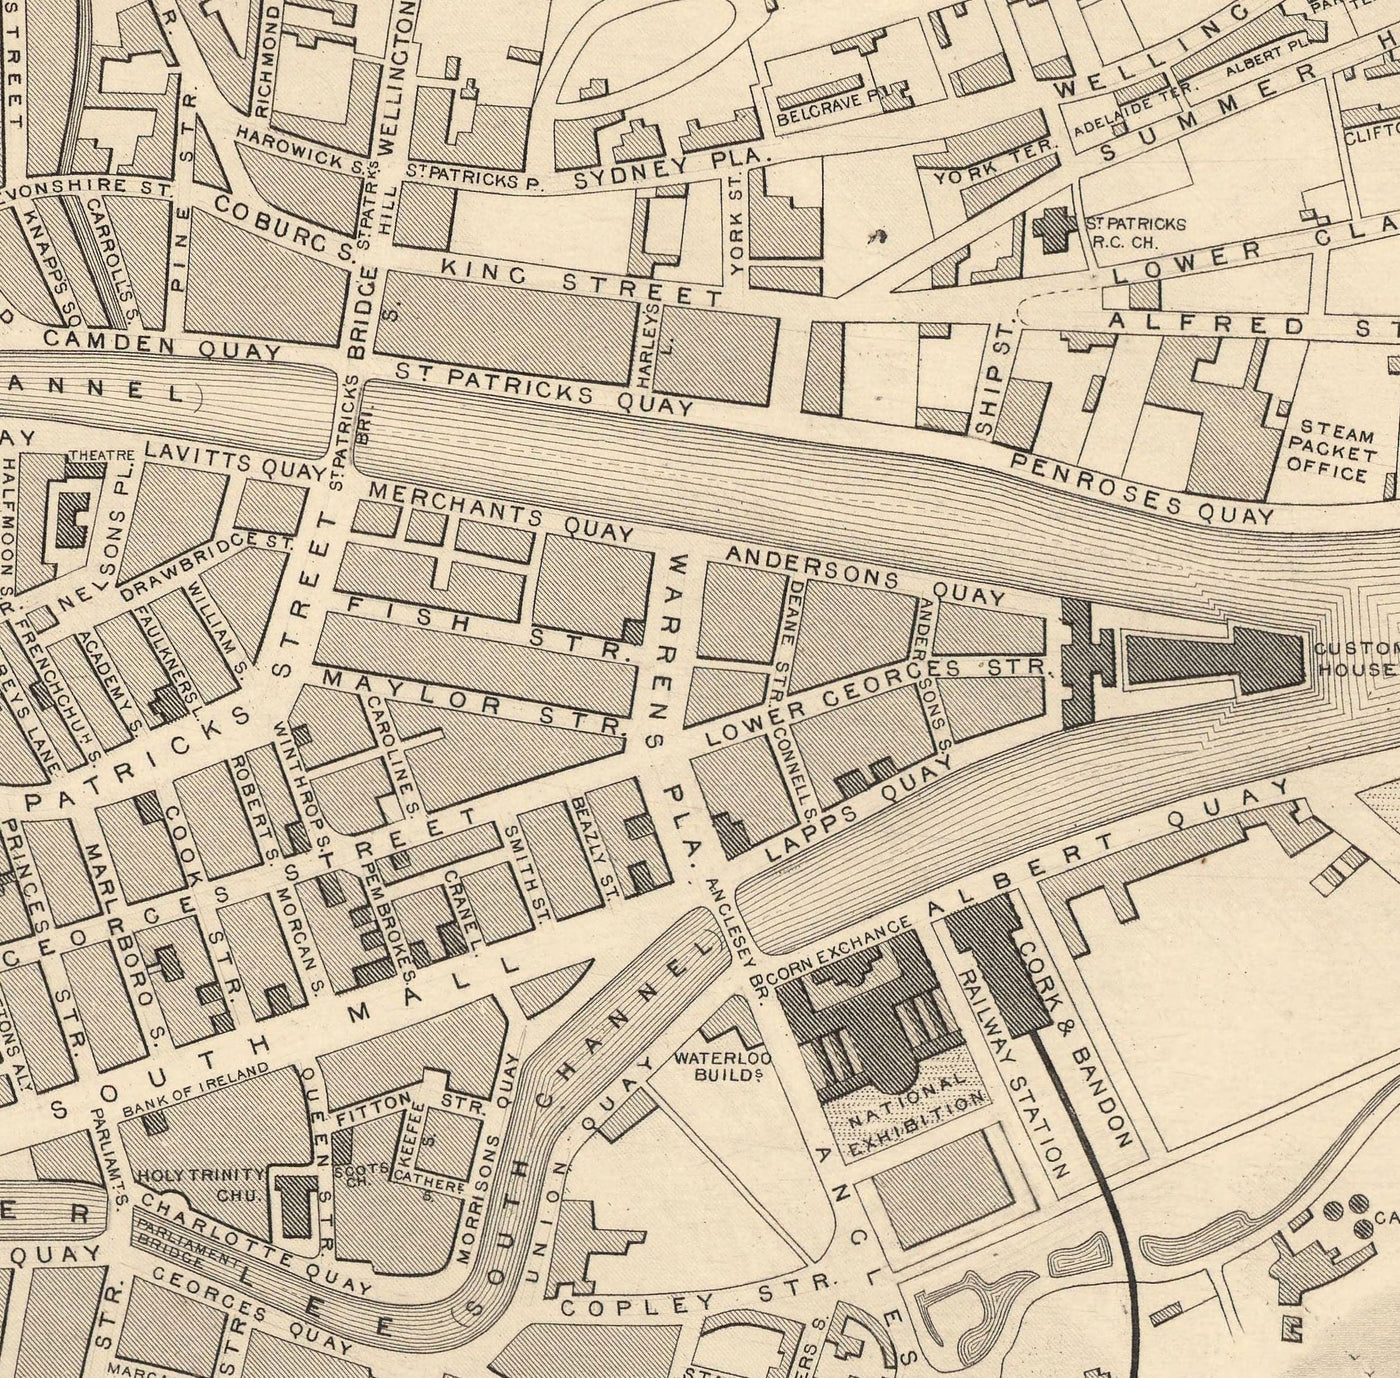 Old Map of Cork, Ireland, 1851 by Tallis & Rapkin - Victorian Quarter, Central, Popes Quay, River Lee, Munster